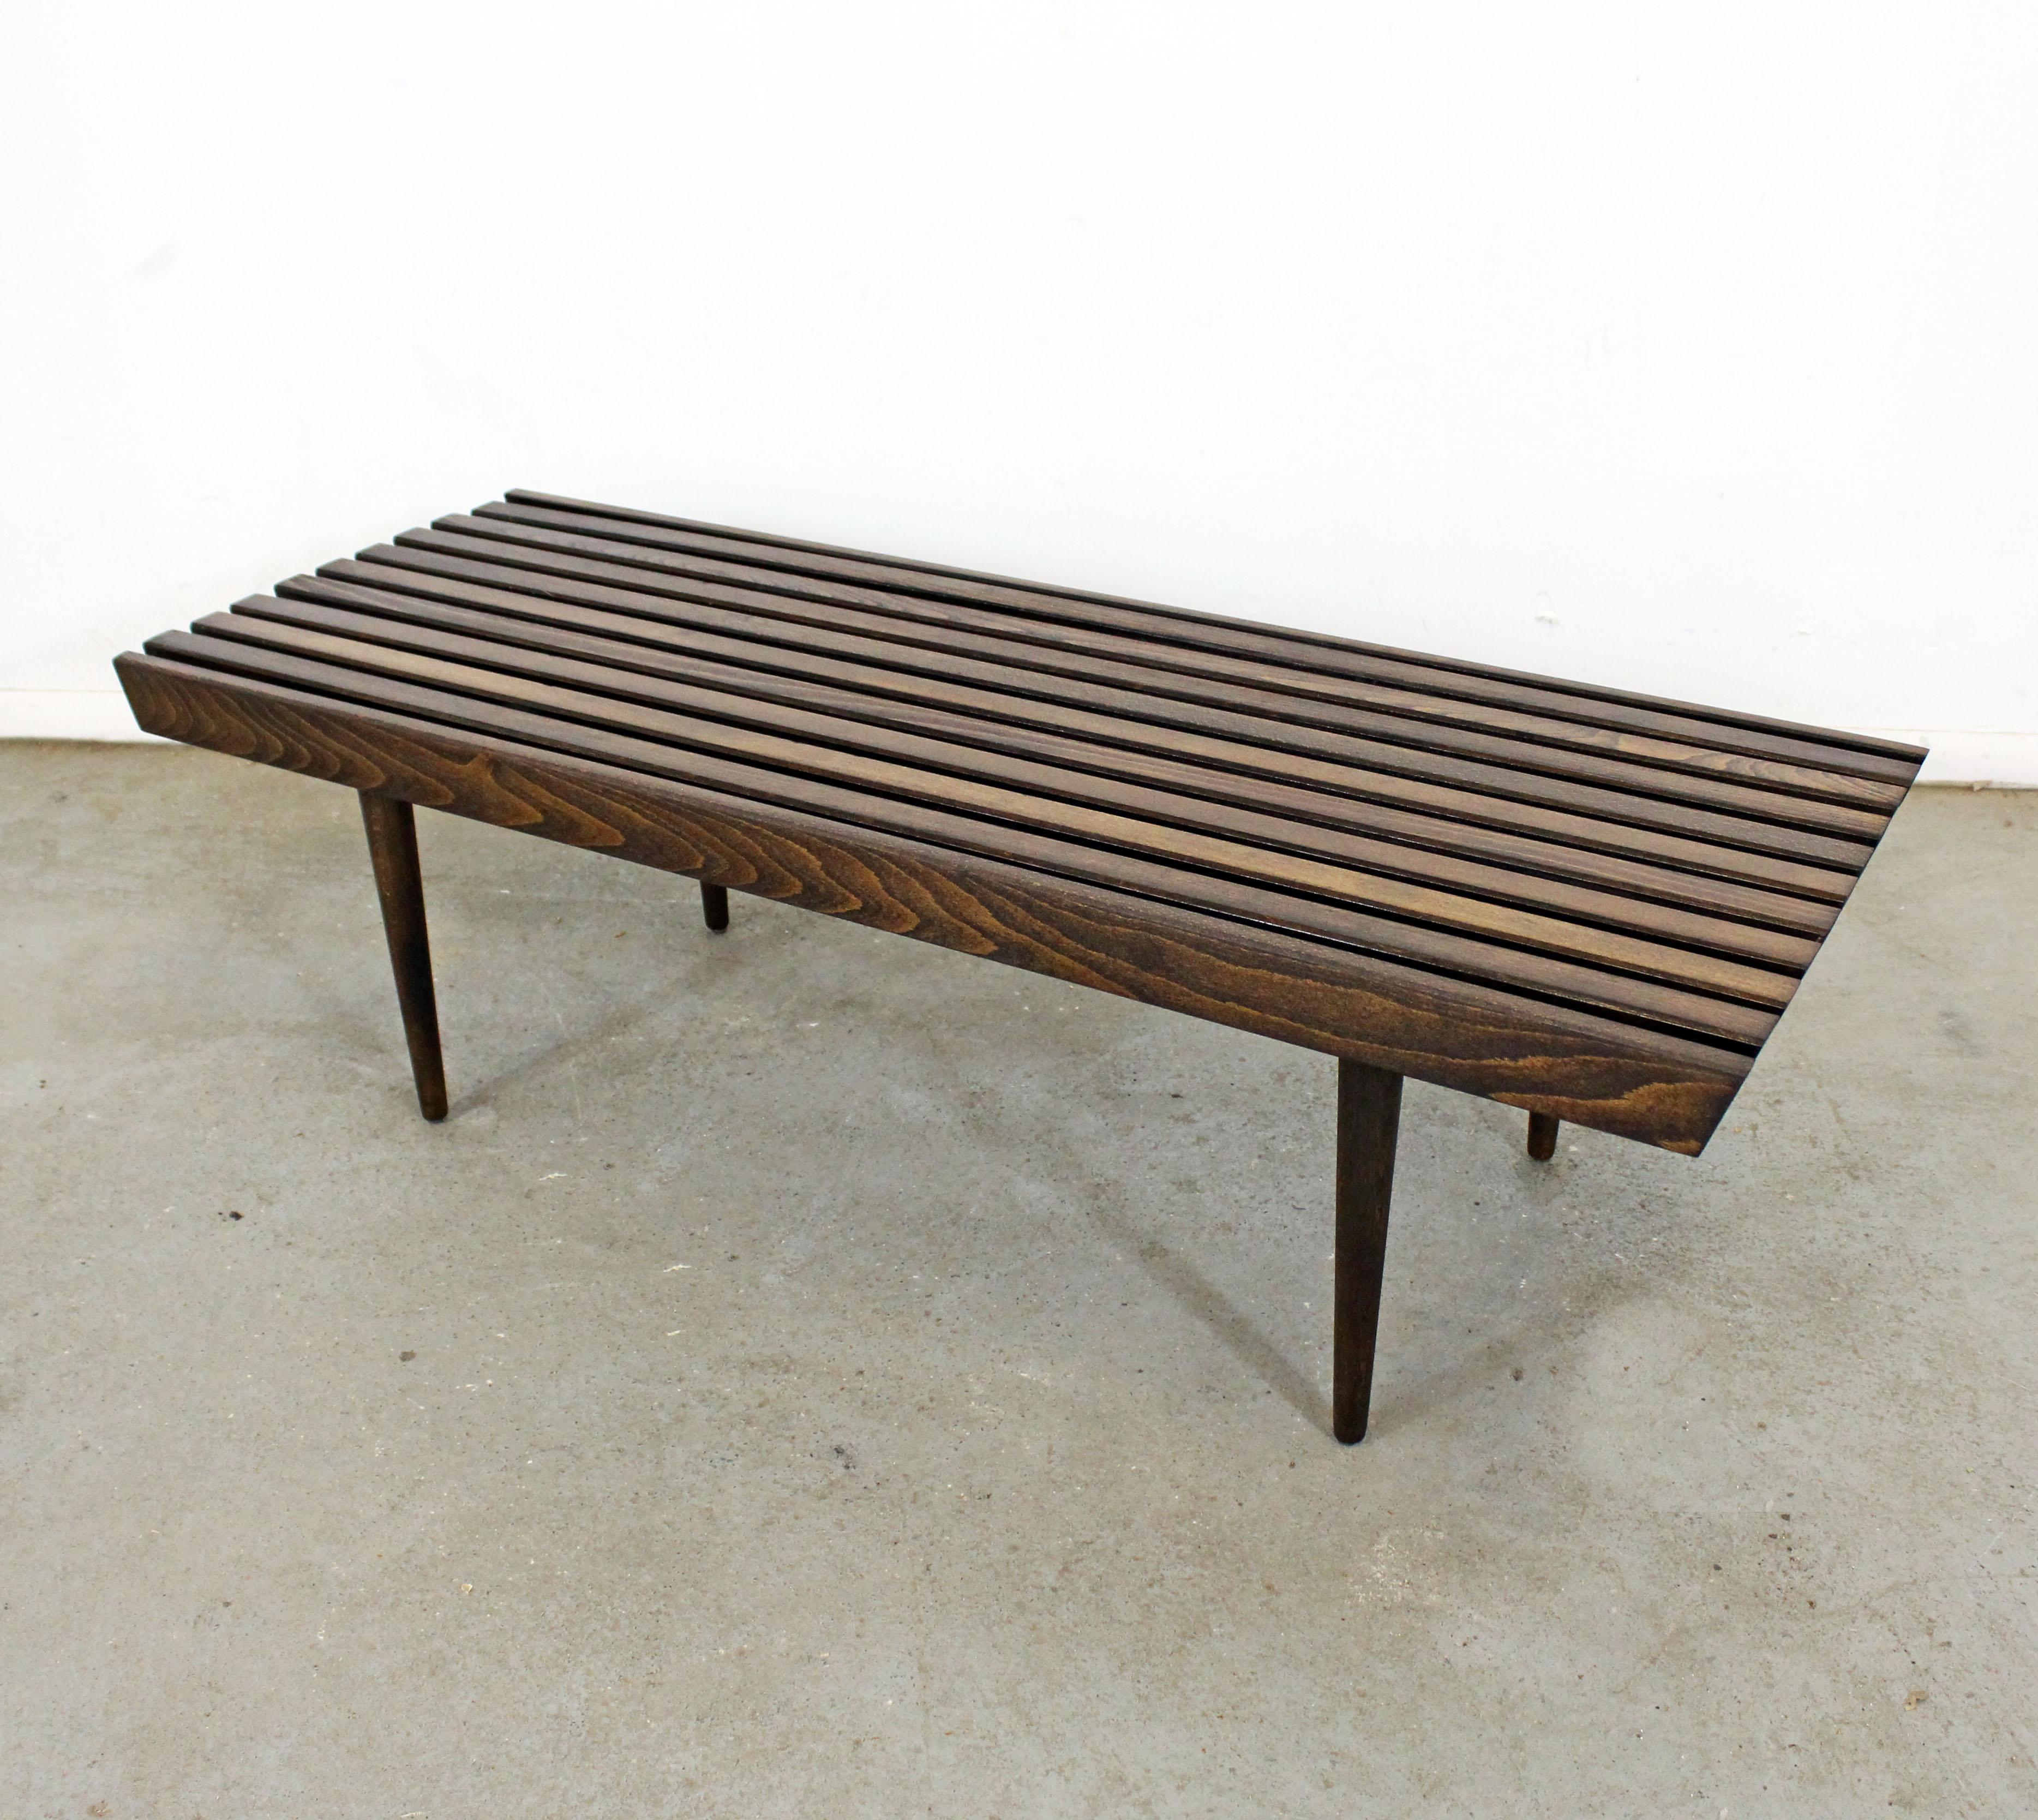 What a find. Offered is a vintage Mid-Century Modern walnut coffee table. Has been refinished and is in good condition with minor surface wear/chips. It is structurally sound and stabile. It is not signed.

Dimensions:
48